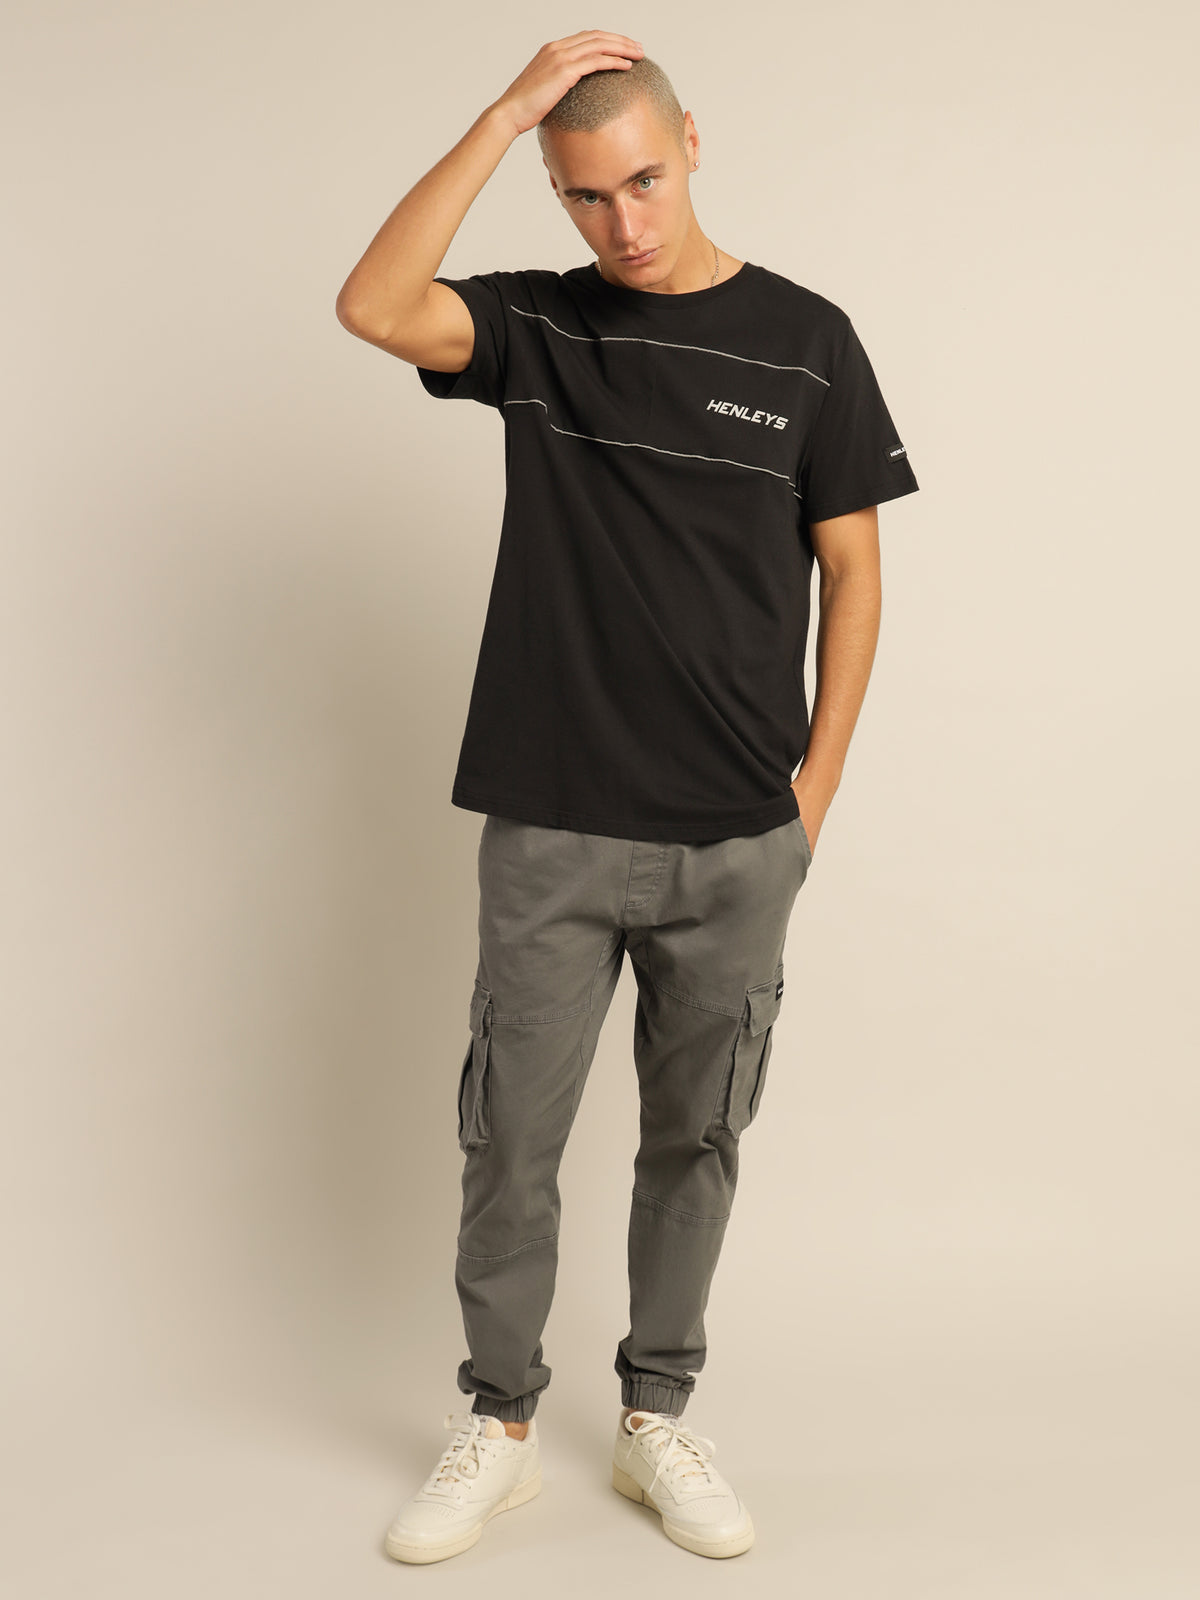 Allied Reflective T-Shirt in Black